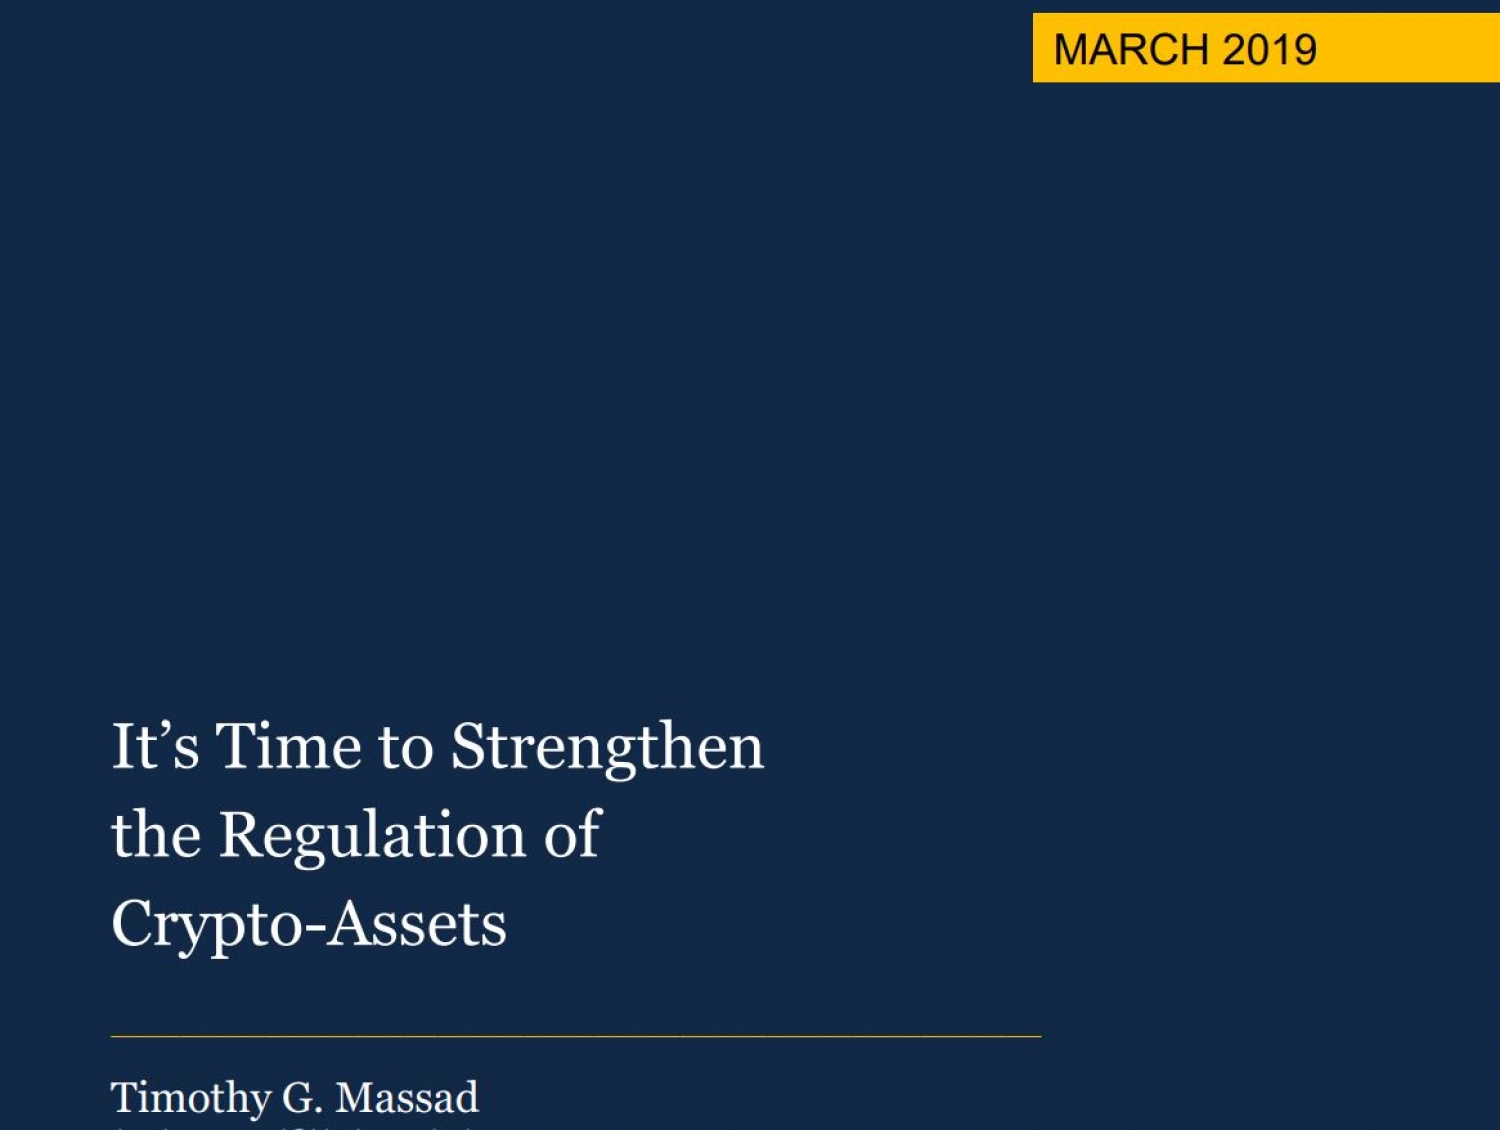 IT’S TIME TO STRENGTHEN THE REGULATION OF CRYPTO-ASSETS